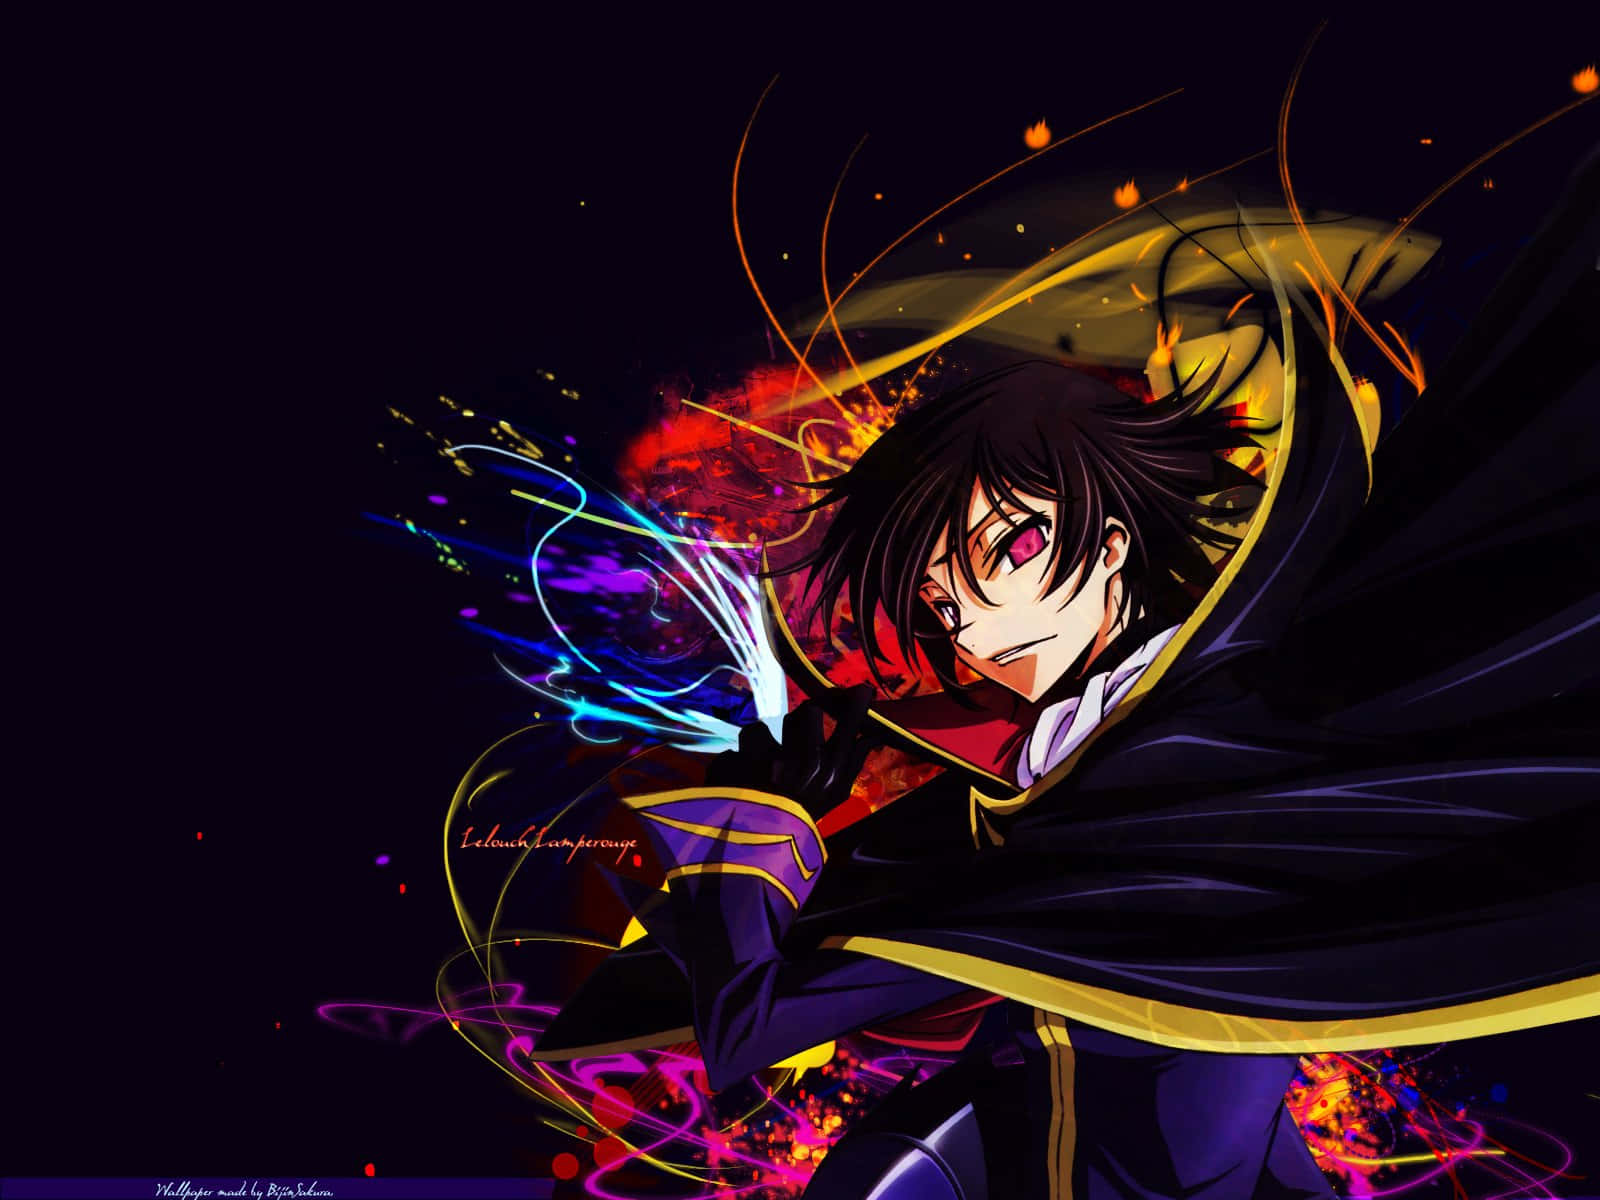 Lelouch Lamperouge deep in thought, Code Geass Anime